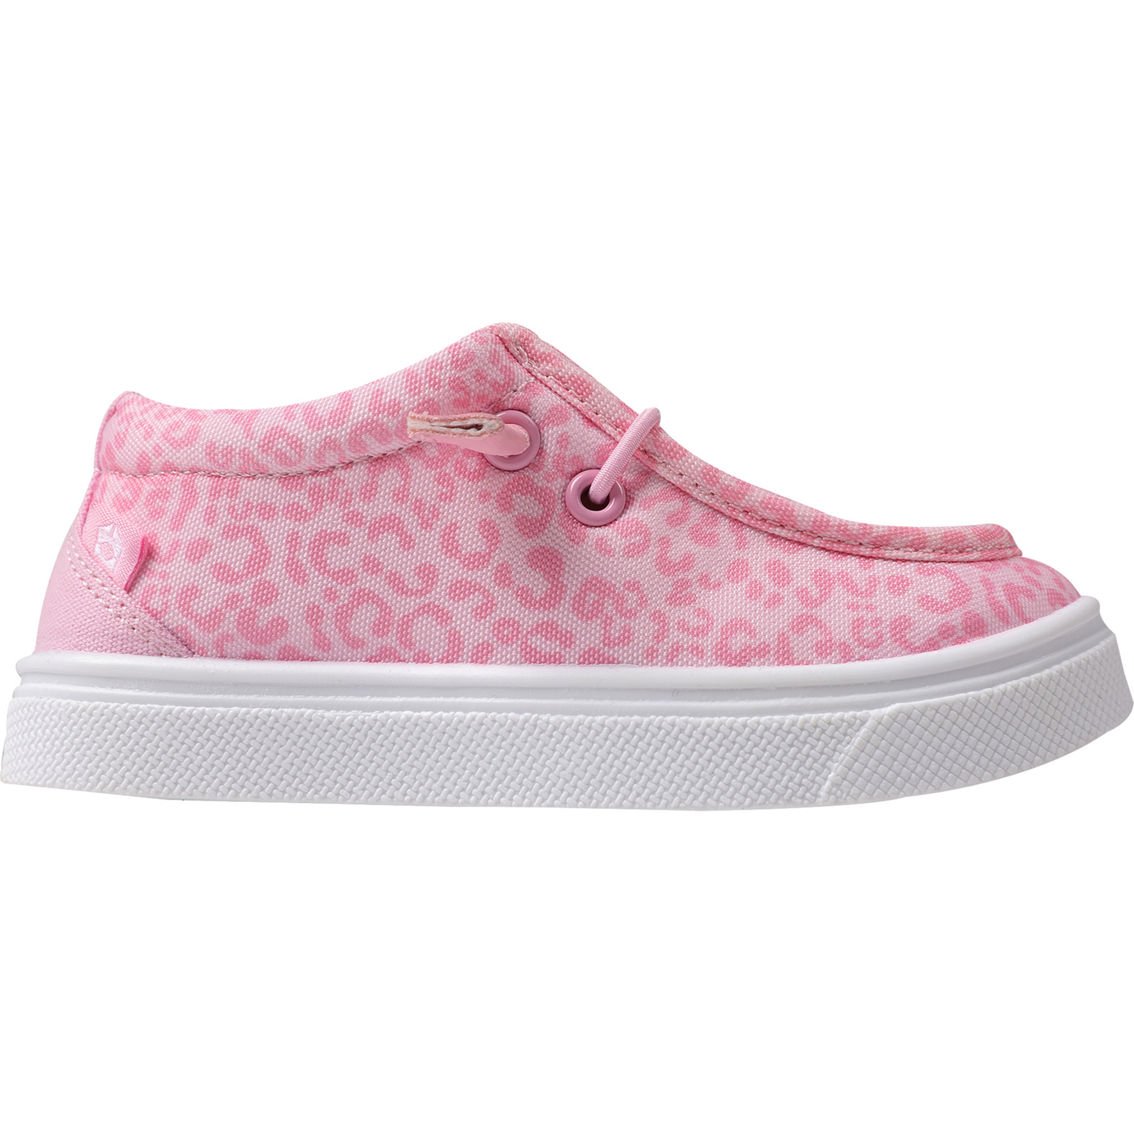 Oomphies Toddler Girls Parker Shoes - Image 2 of 4